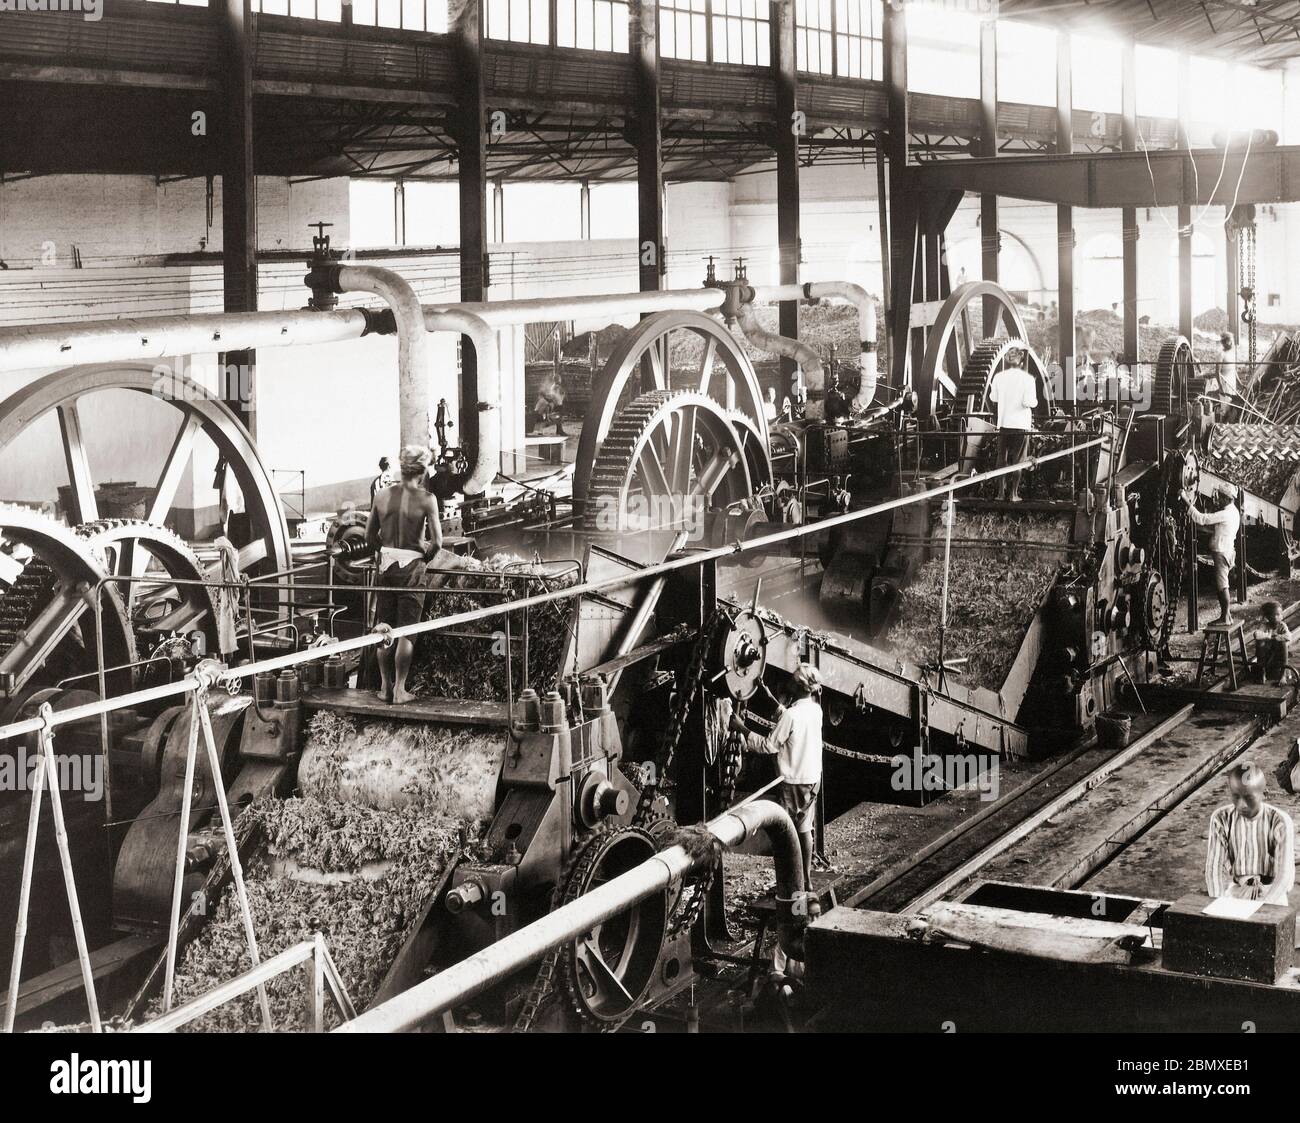 Machinery for processing sugar cane in the Dutch East Indies (modern Indonesia) late 19th century.   After a photograph possibly by Turkish born photographer Ohannes Kurkdjian, 1851 - 1903. Stock Photo